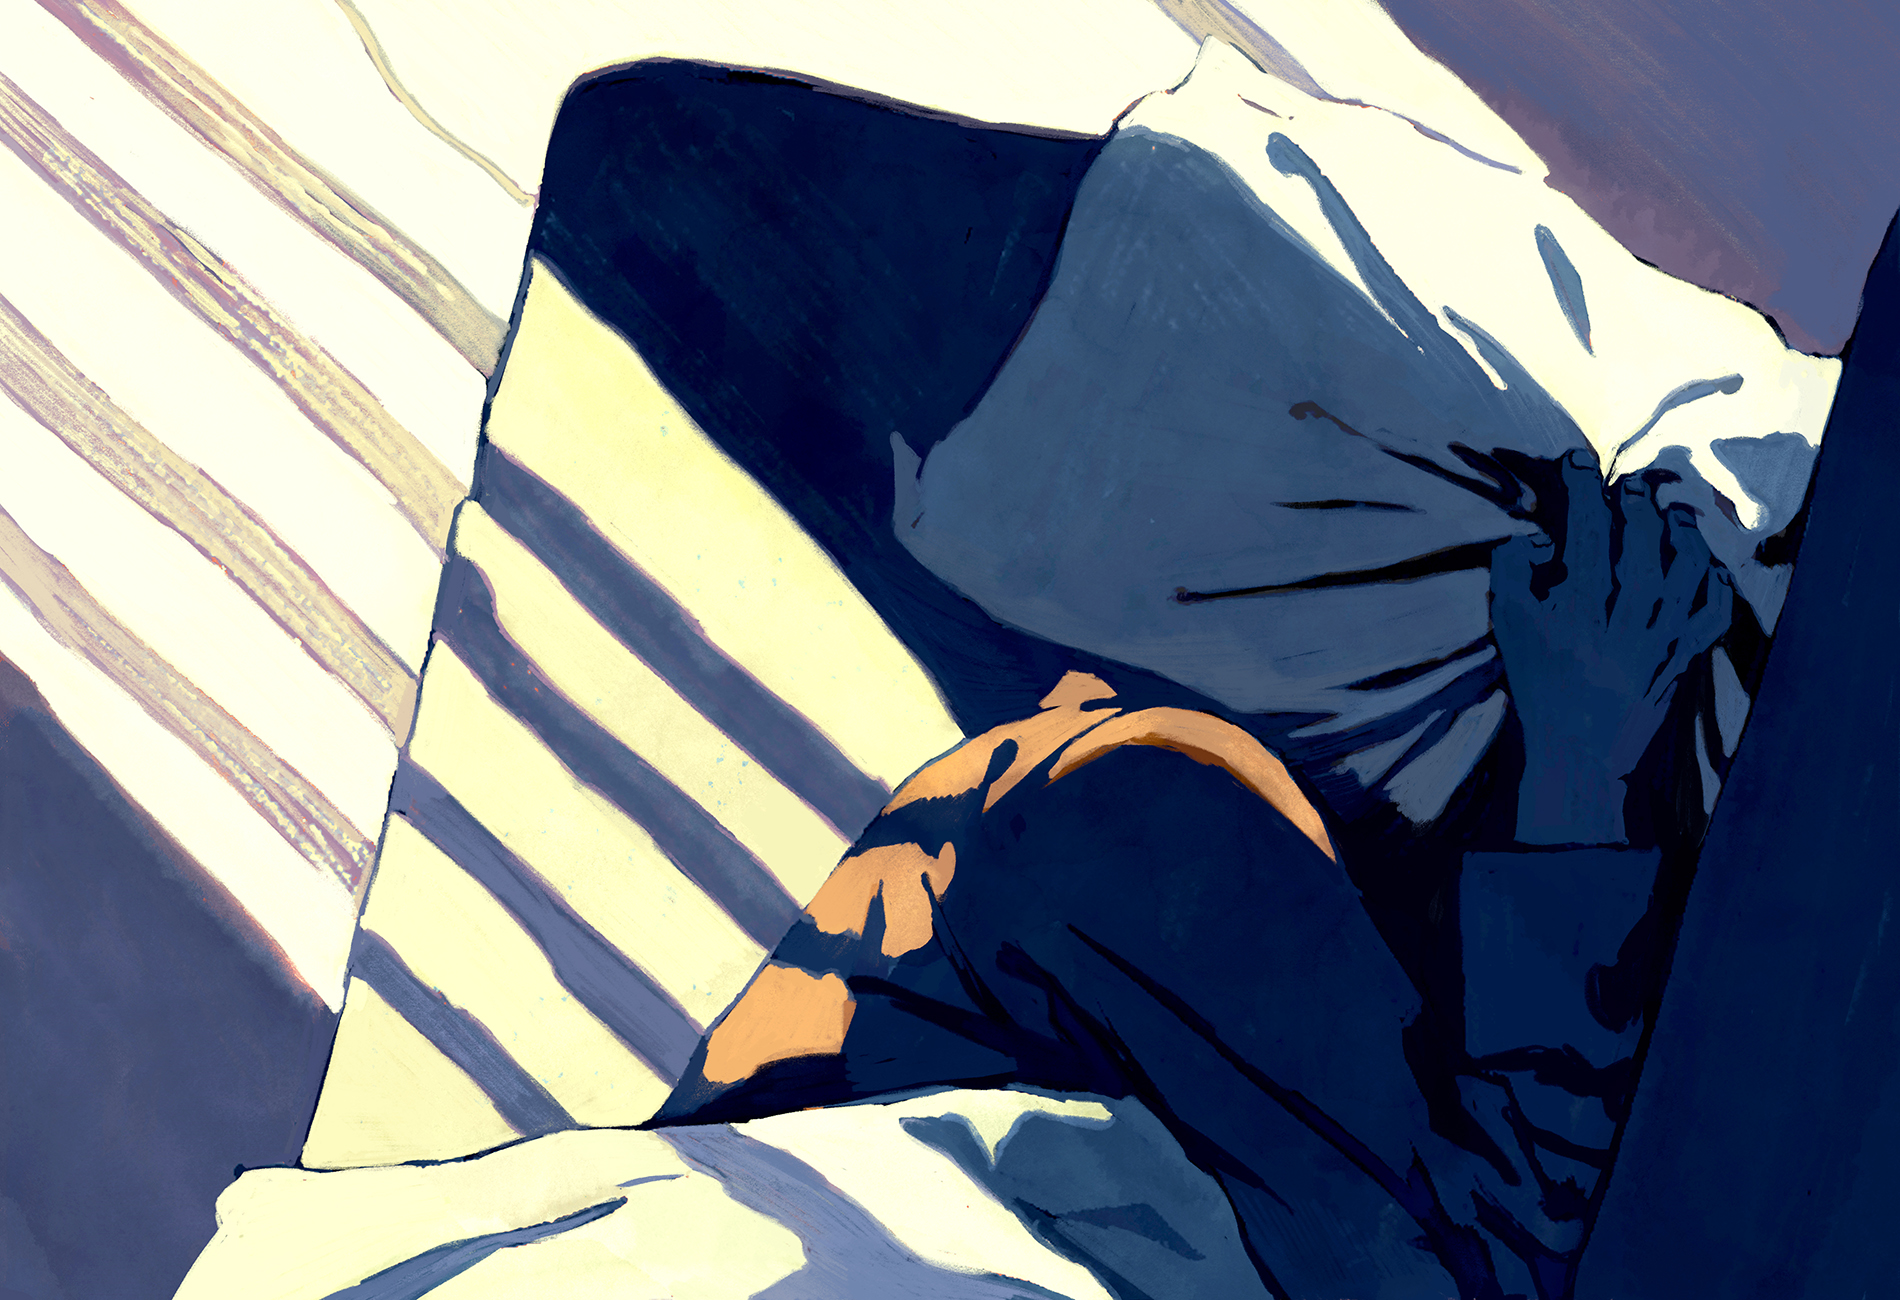 Illustration shows man trying to sleep under bright lights, with a pillow pulled over his head.